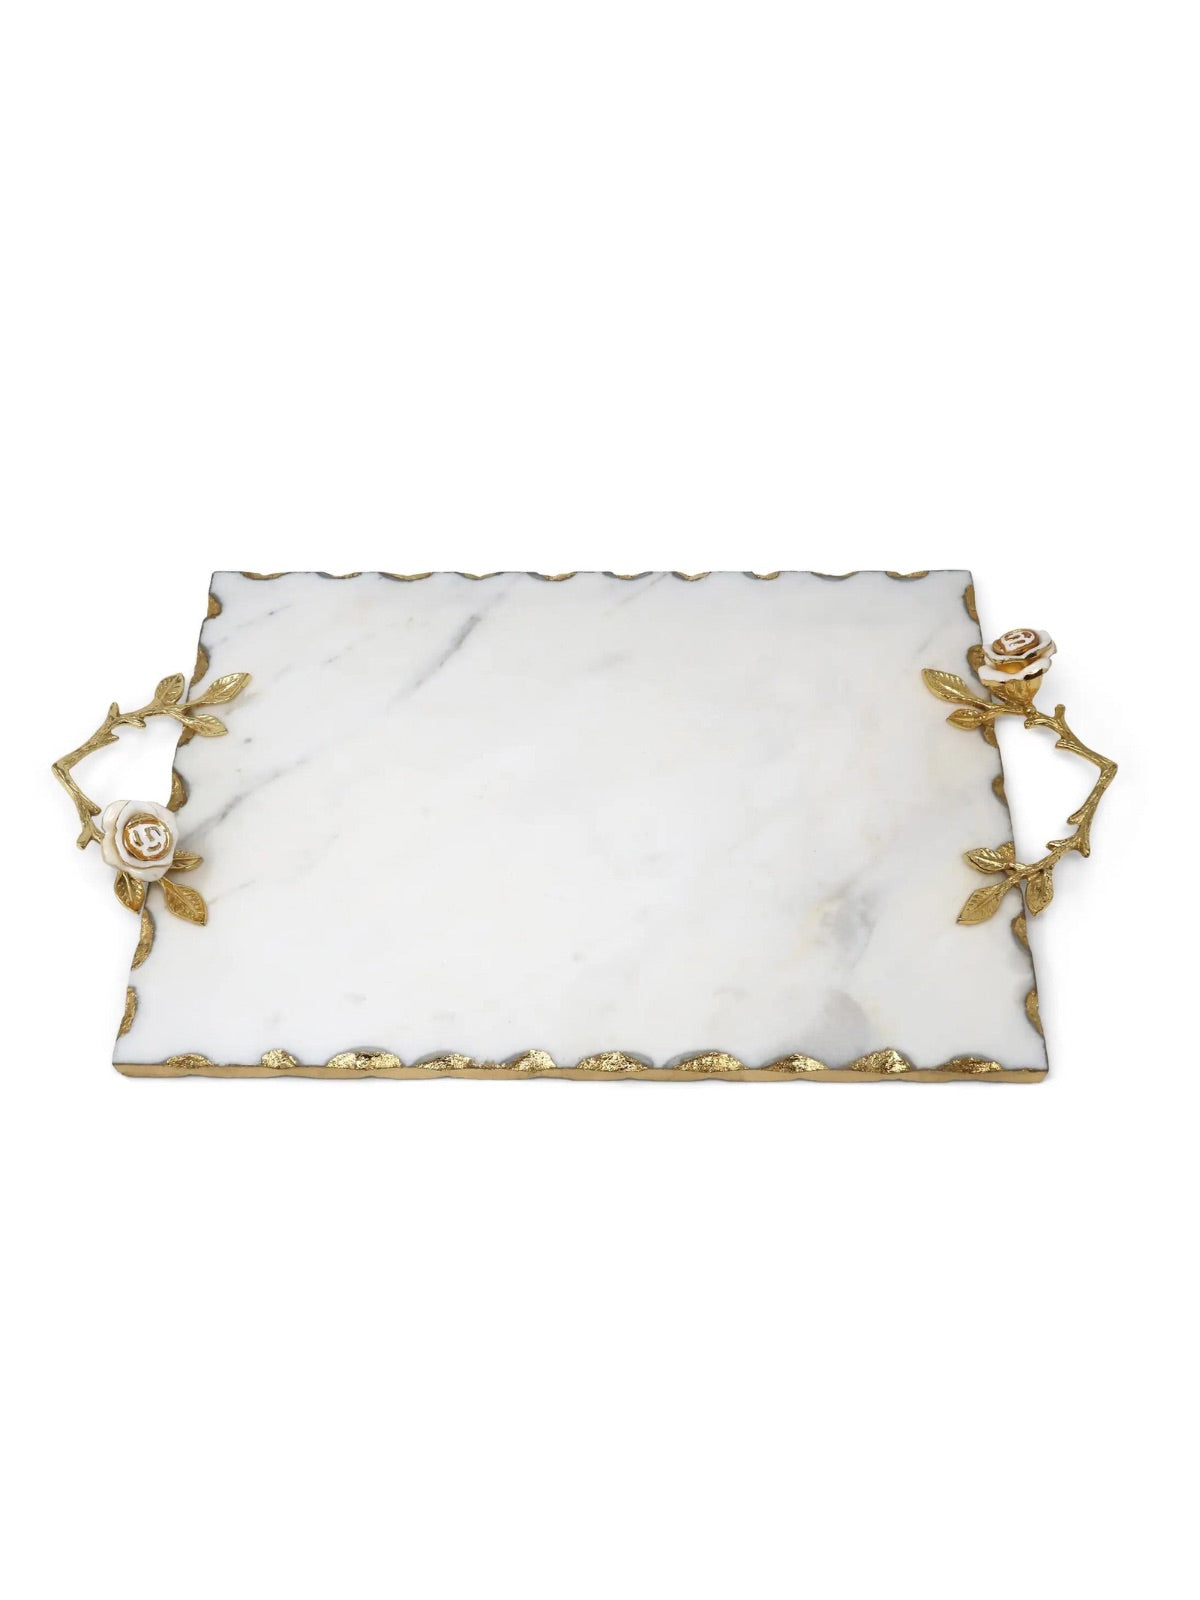 Rectangular White Marble Tray with Gold Rose Designed Handles and Gold Rim Measuring 16 inches.